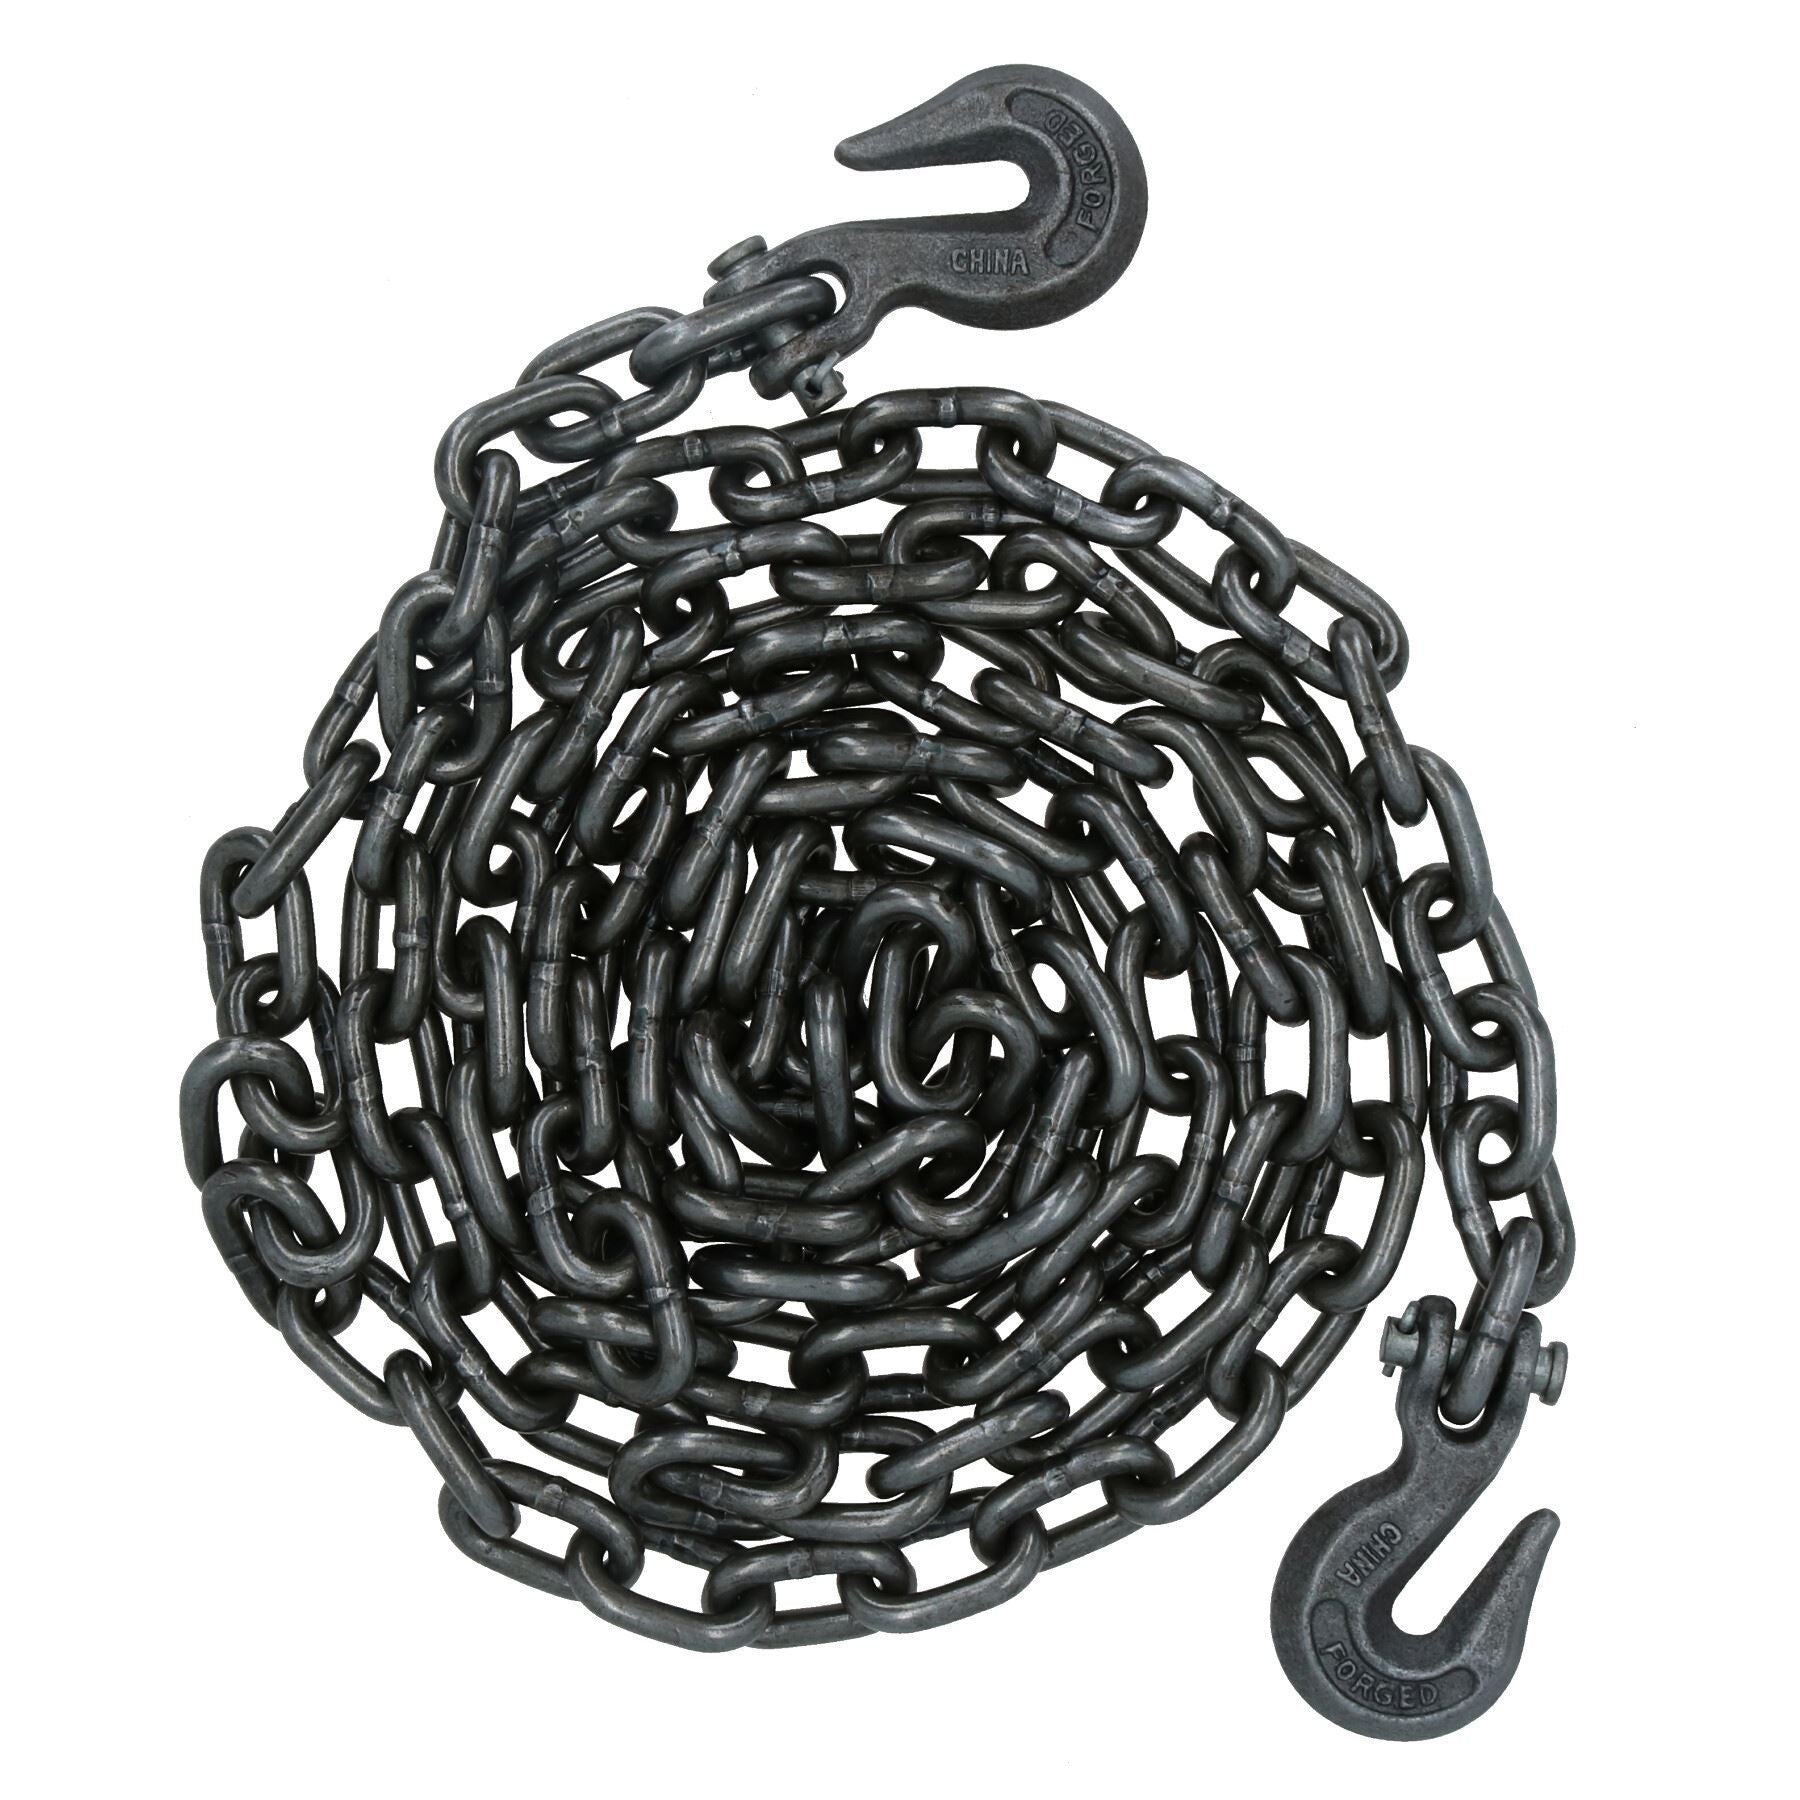 4 Metre Tow Towing Recovery Chain 2 Grab Hooks With 2450kg Working Load